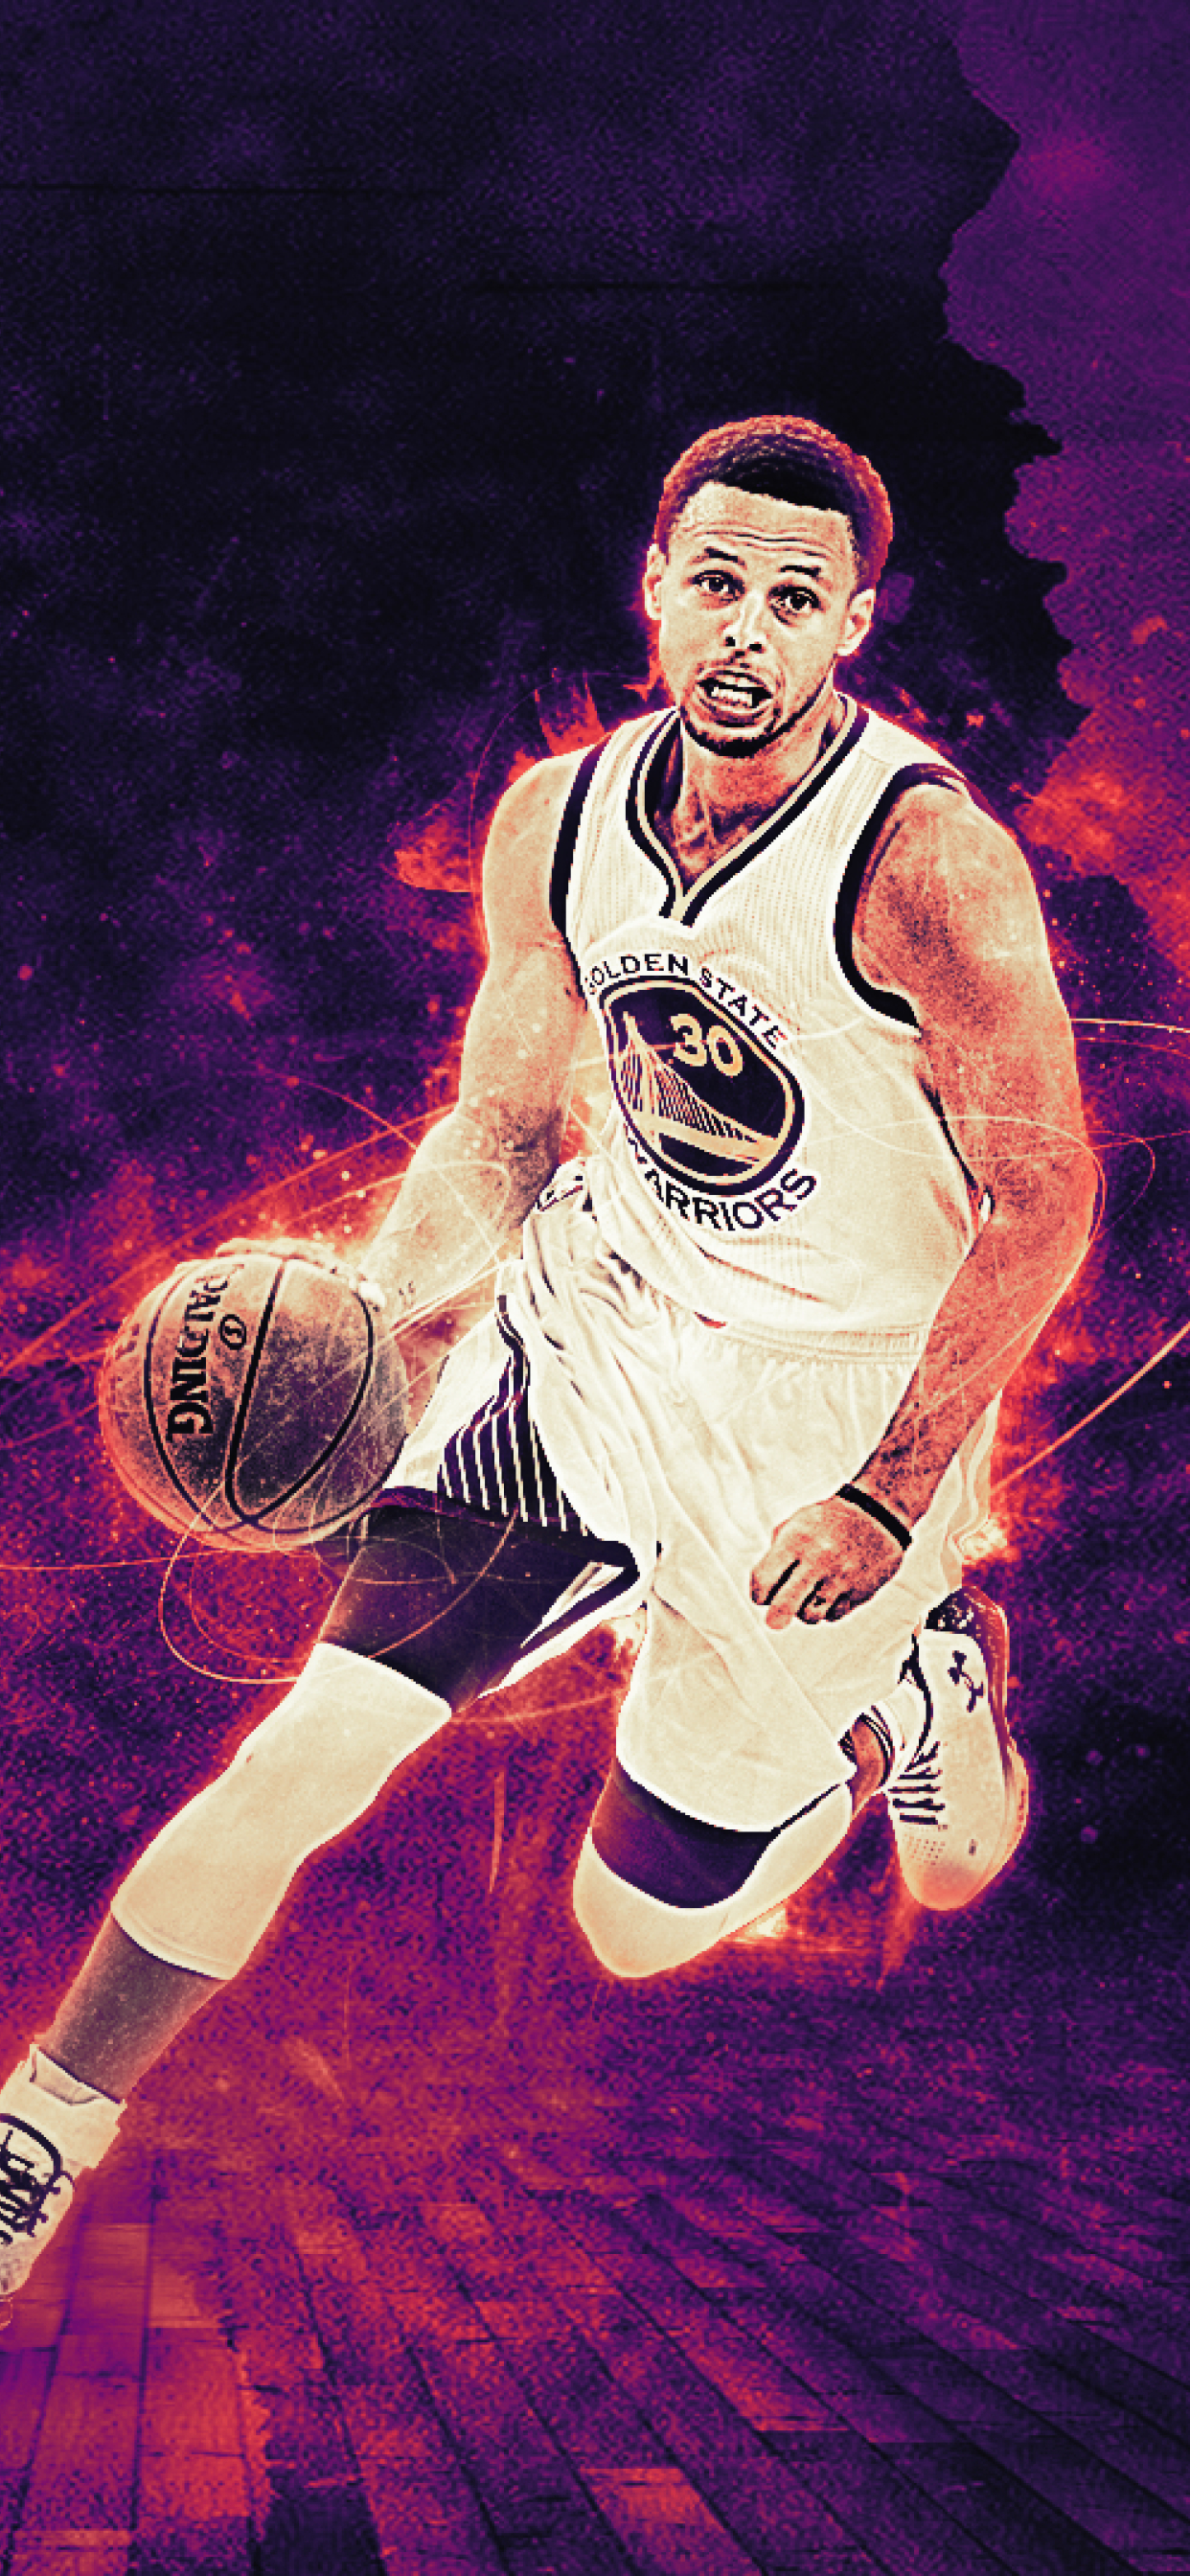 Stephen Curry Wallpaper Discover more American Atlanta Hawks Basketball  National Player wallpaper  Stephen curry Stephen curry basketball Nba  stephen curry